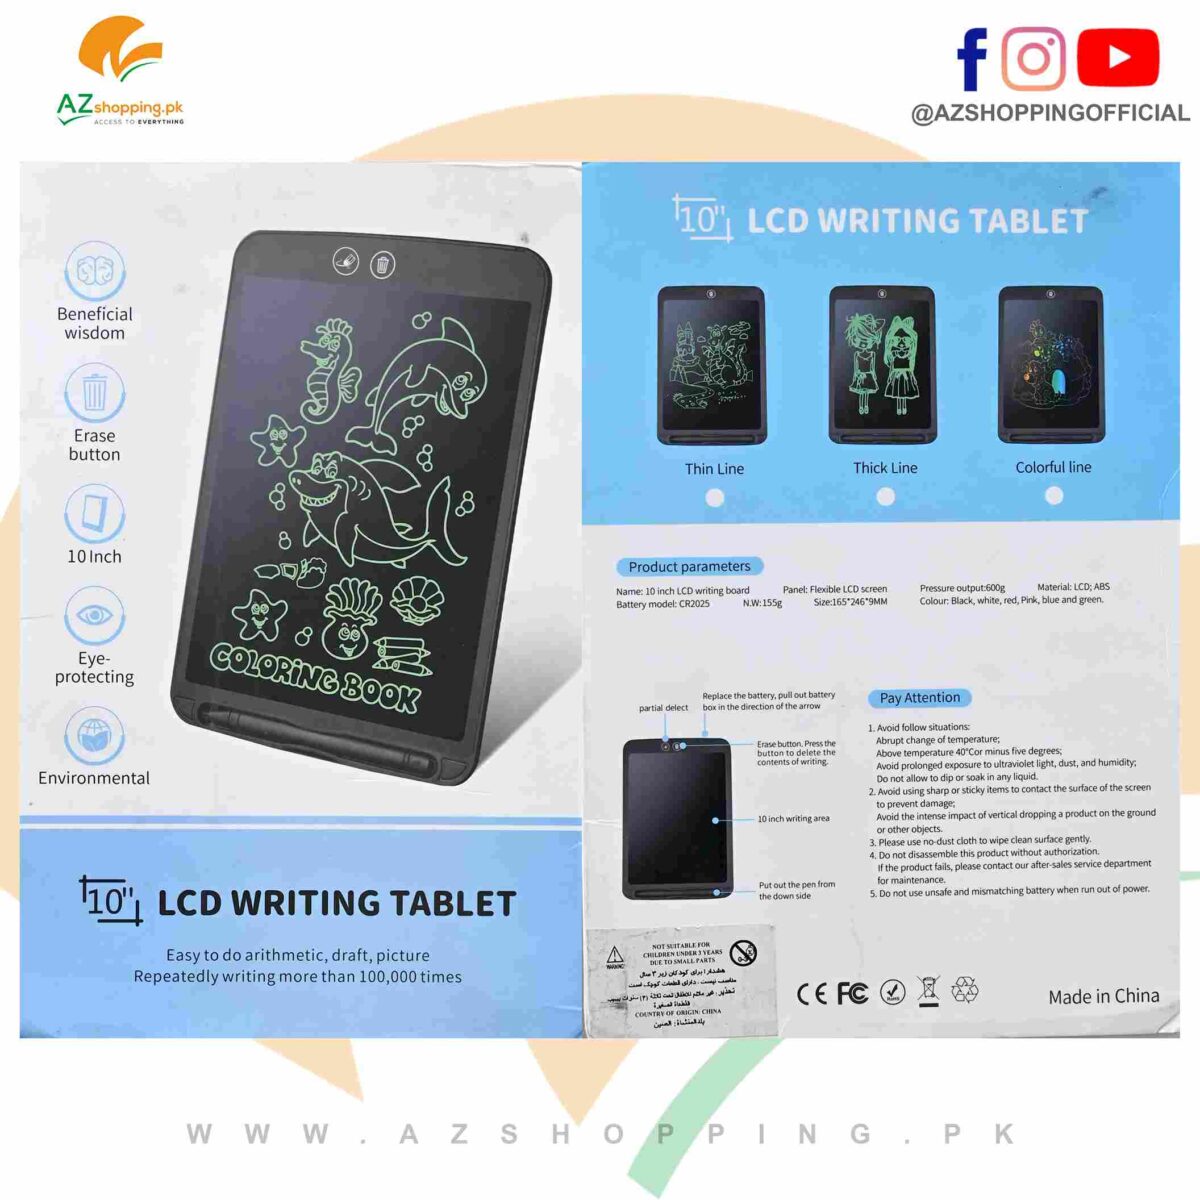 10” Inches Electronic LCD Writing Graphic Drawing Pad Board Tablet with Pen & Erase Button, Eye-Protecting, Environmental – Battery Model: CR2025